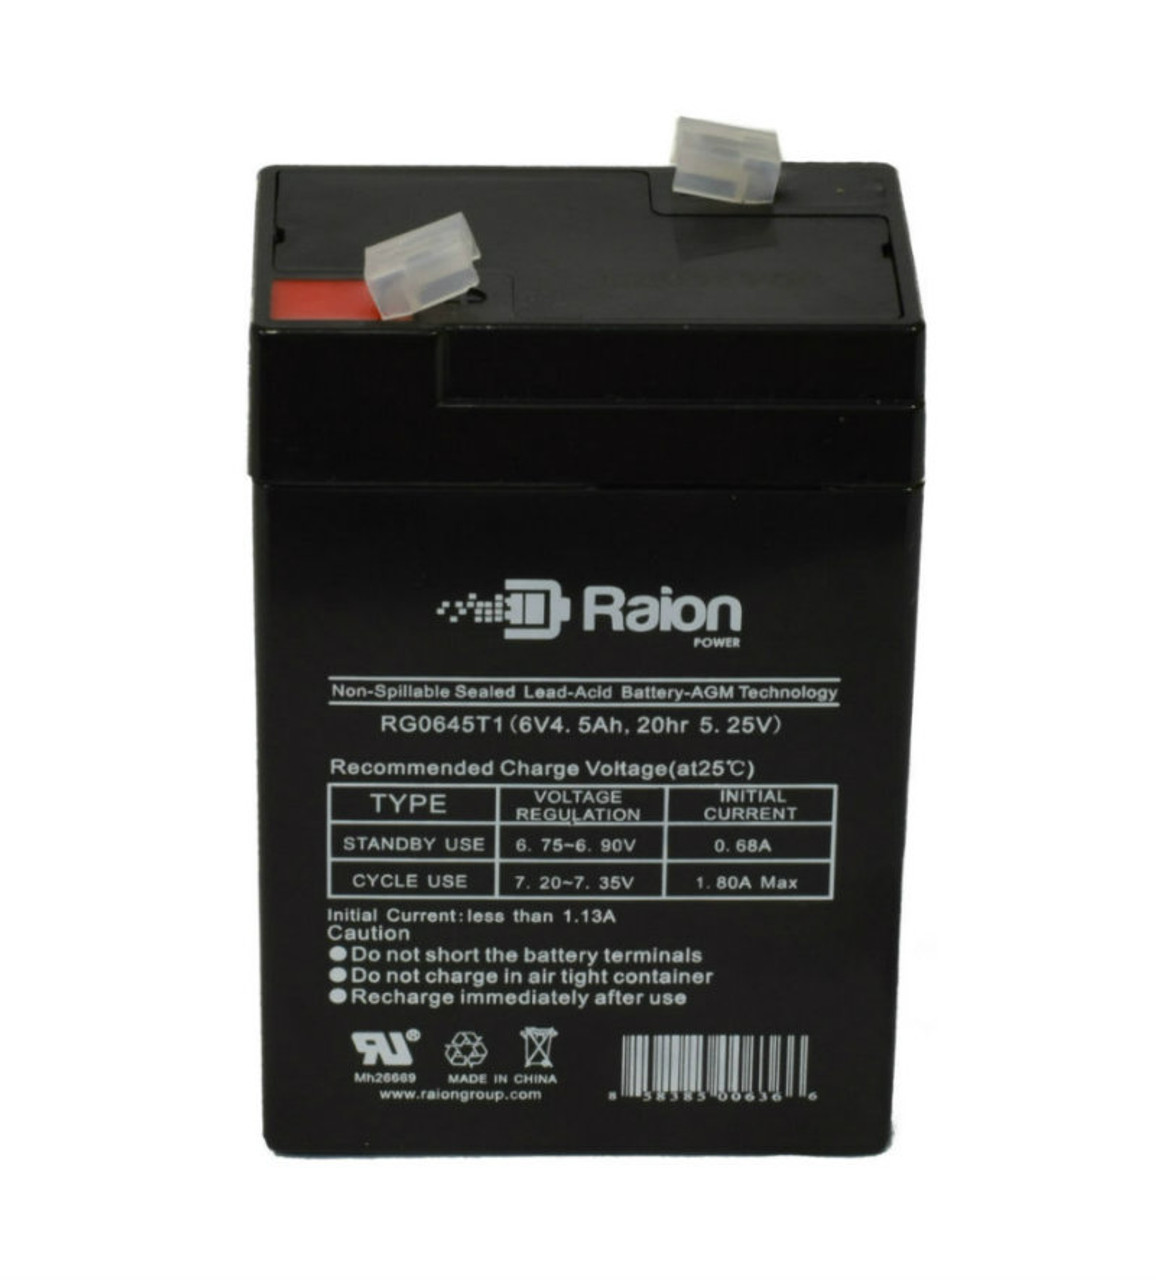 Raion Power RG0645T1 Replacement Battery Cartridge for SunStone Power SPT6-5